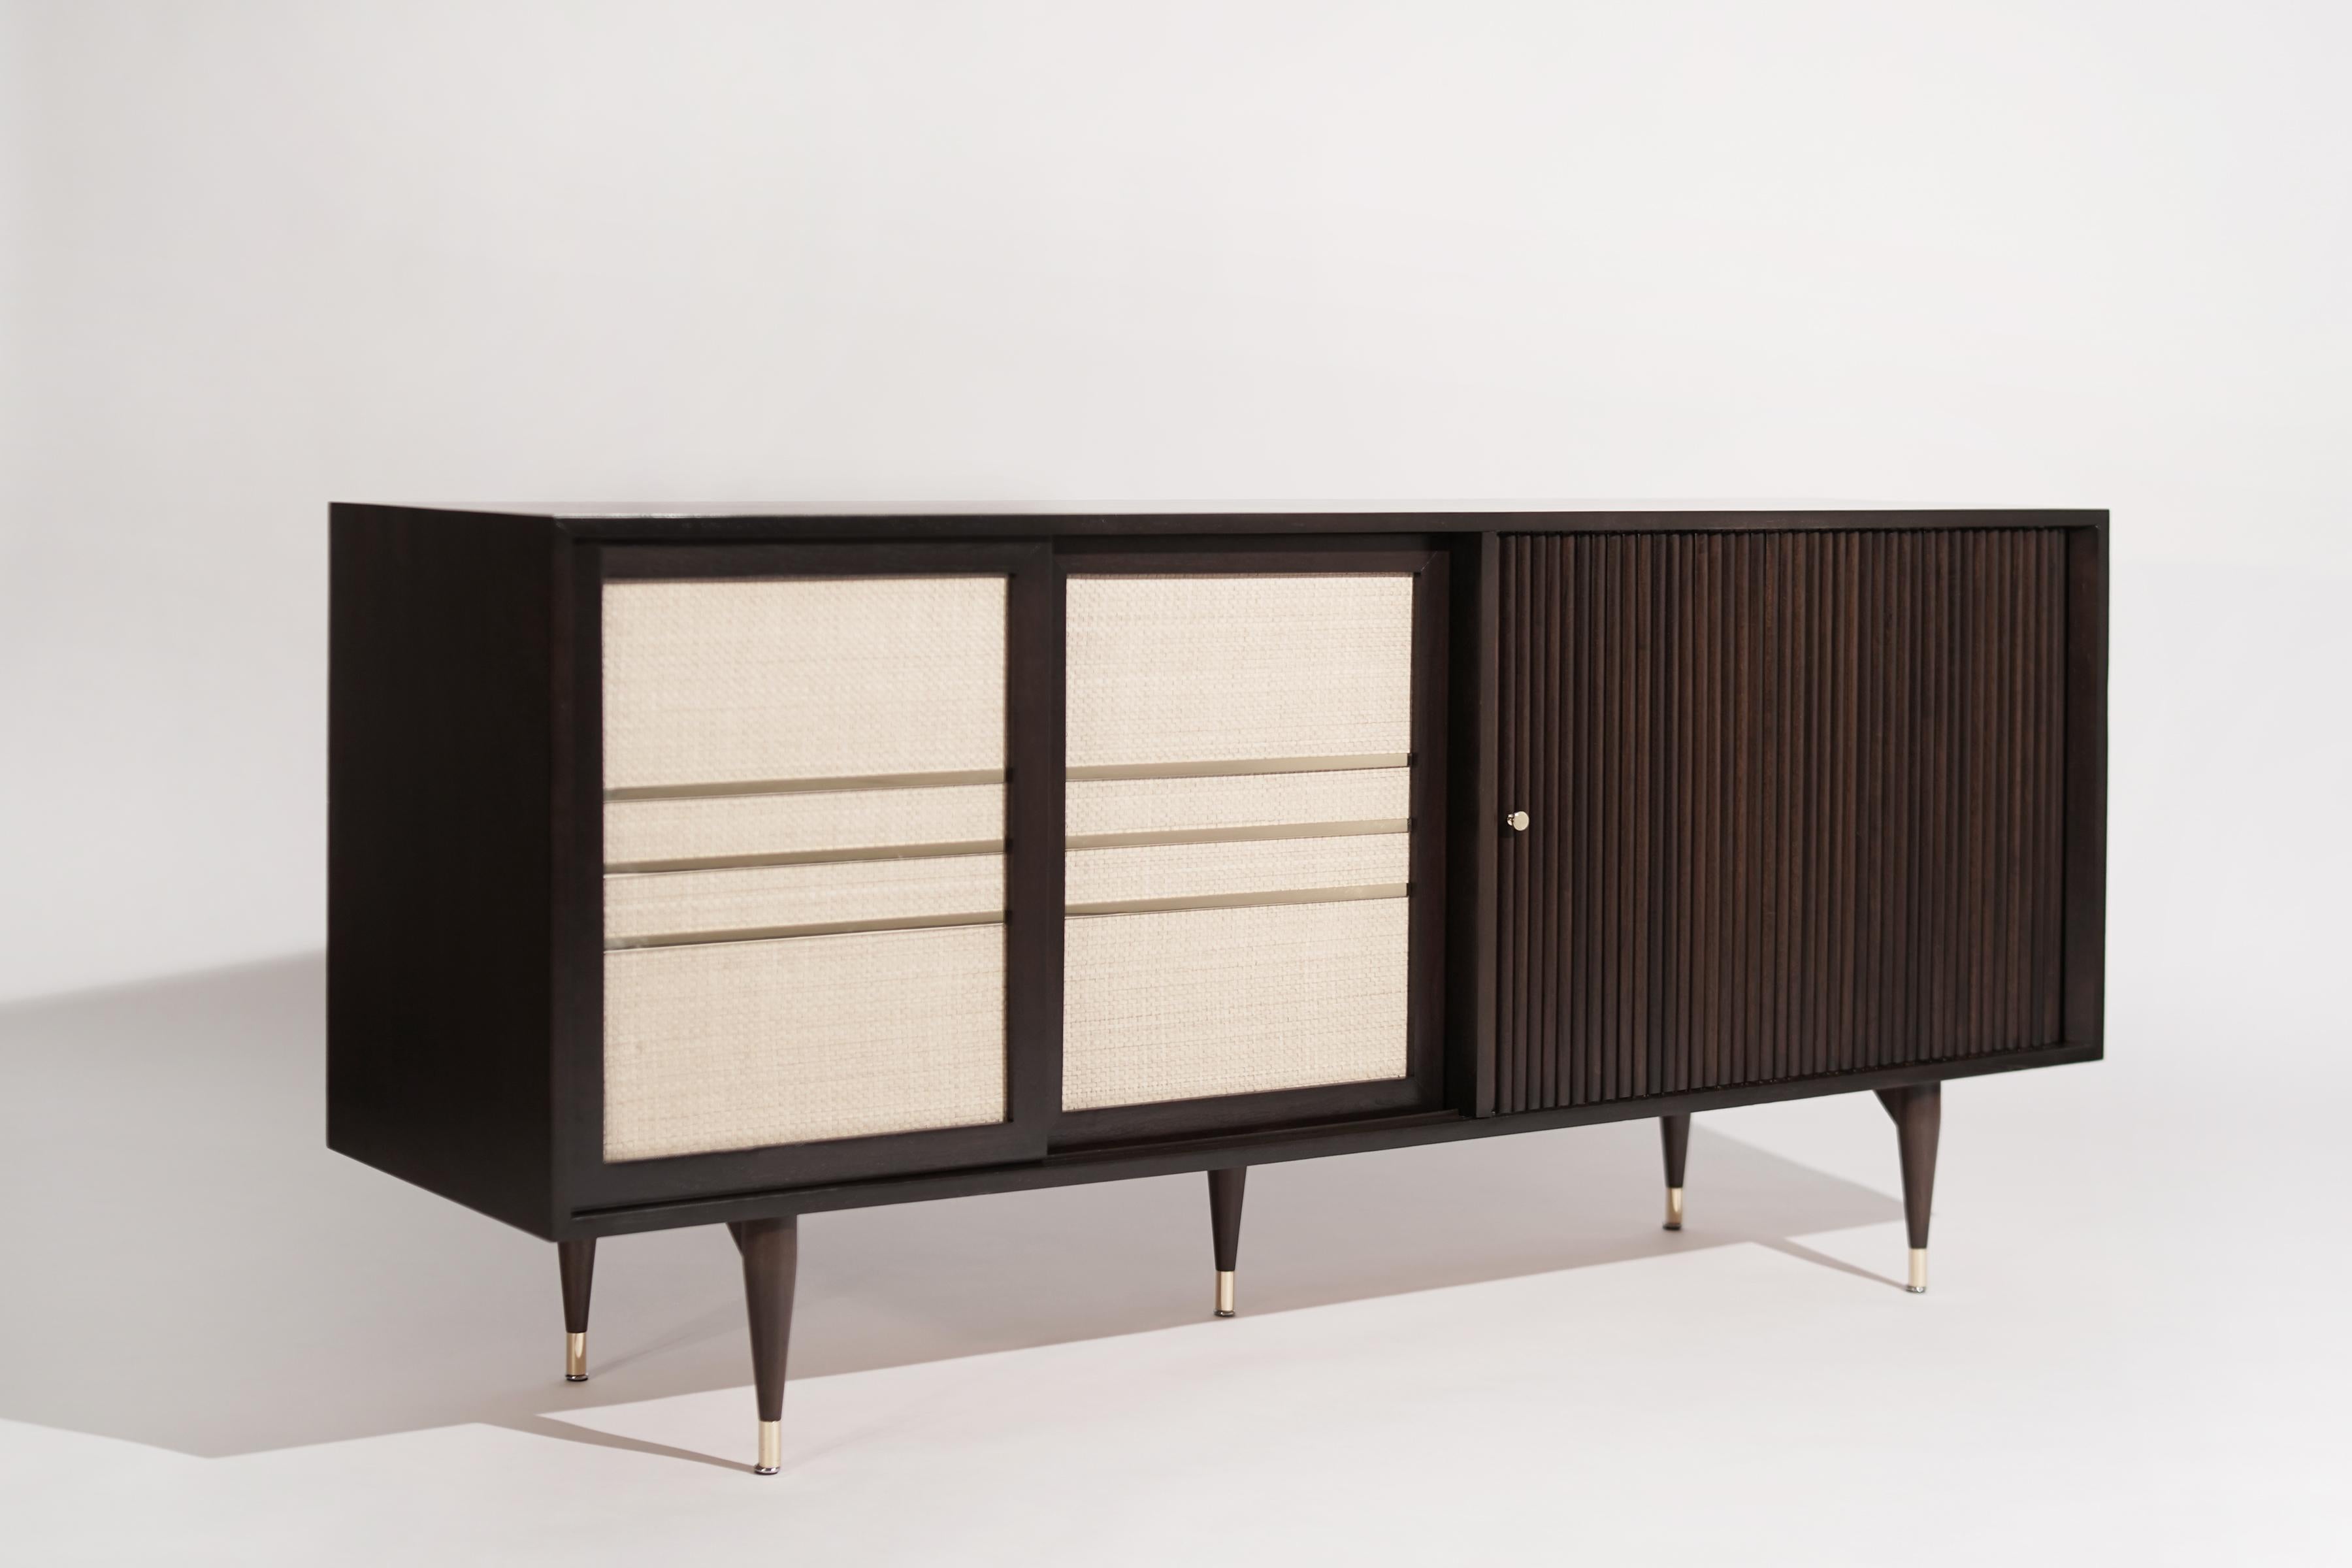 American Mid-Century Brass and Walnut Credenza, C. 1950s For Sale